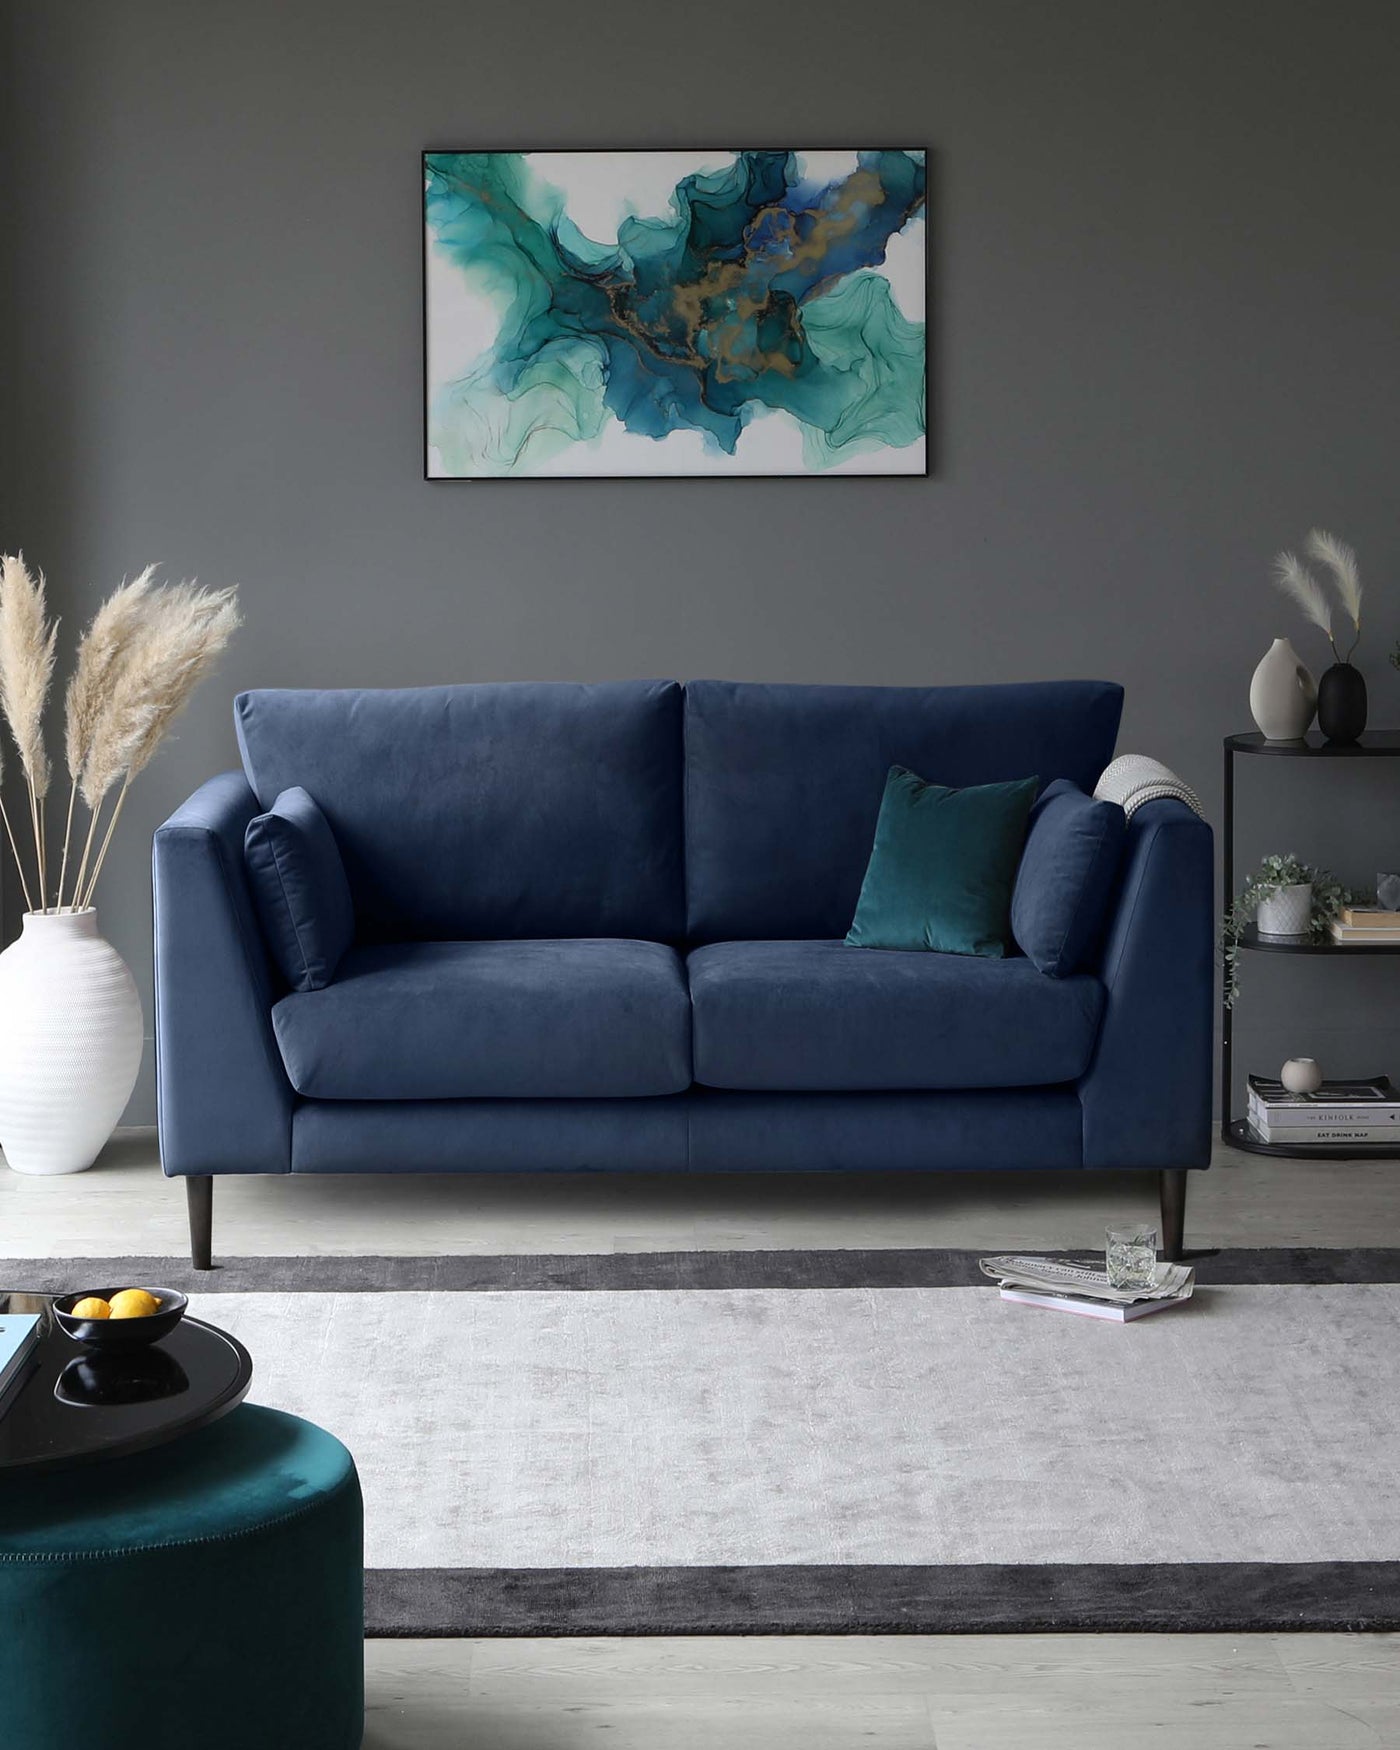 Elegant deep blue three-seater sofa with plush cushions, resting on tapered dark wooden legs. Accompanied by a round teal ottoman with a black tray on top, over a large off-white and grey area rug with dark border. A small rectangular metallic side table with a lower shelf displaying books and decorative items is to the right of the sofa.